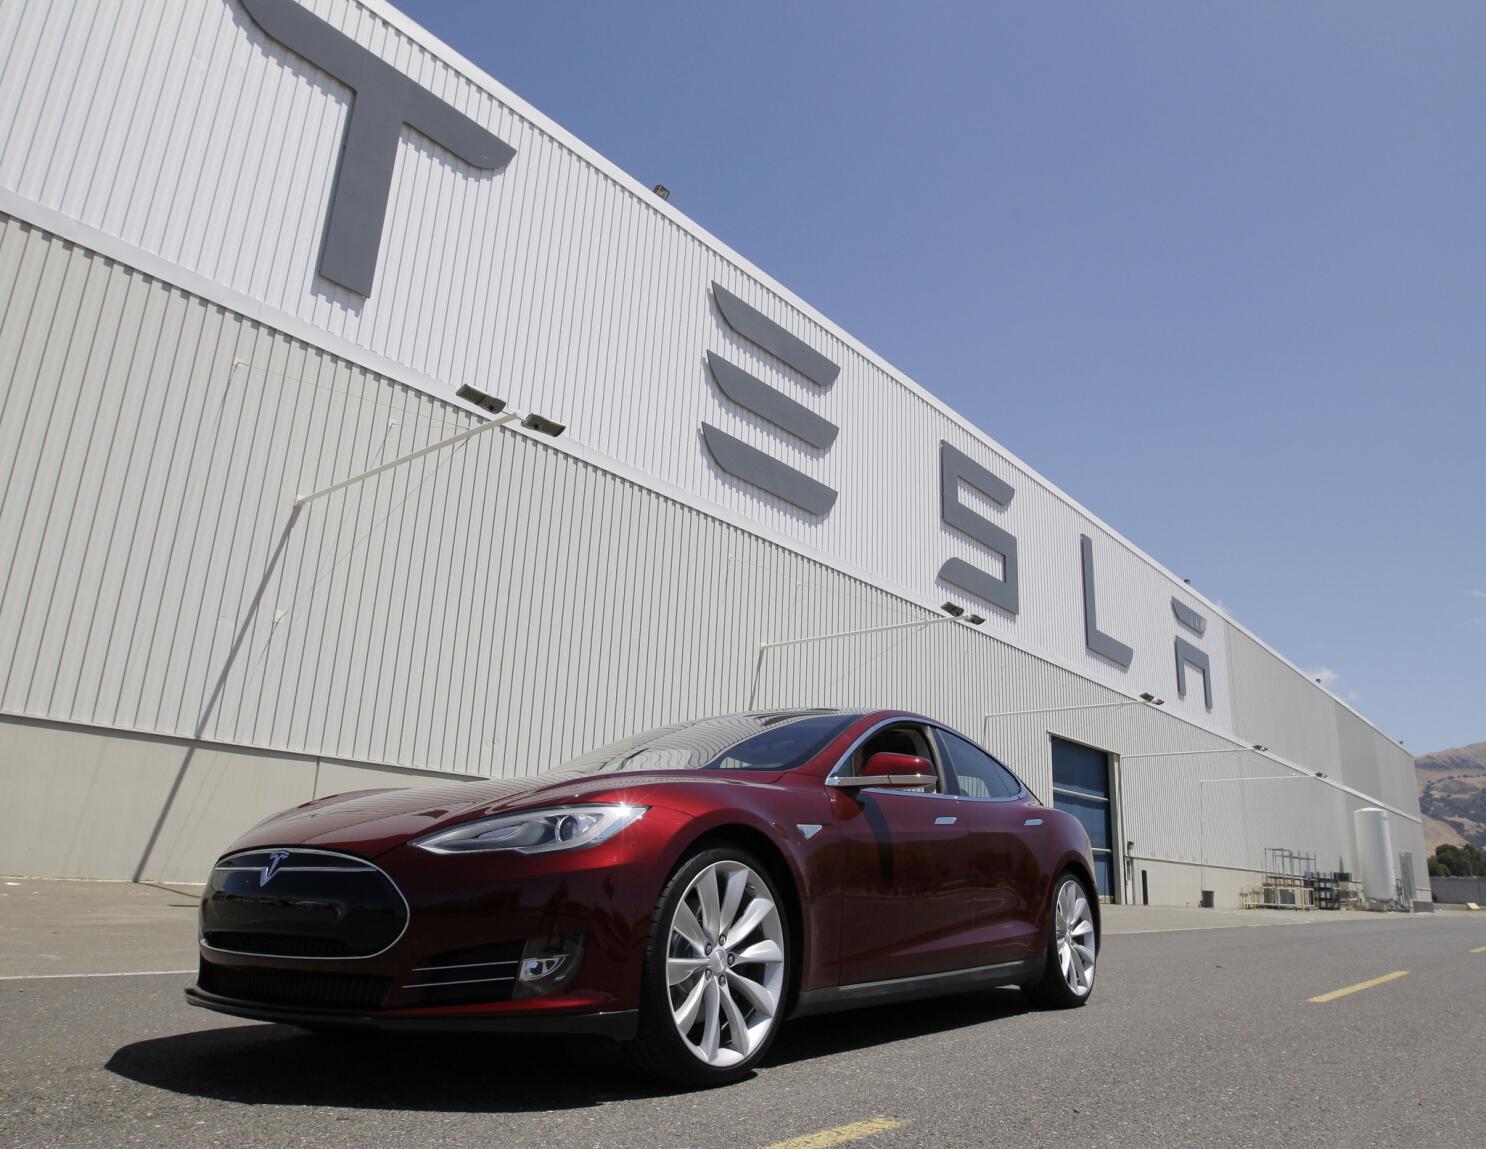 Tesla's reports left out hundreds of injuries, California